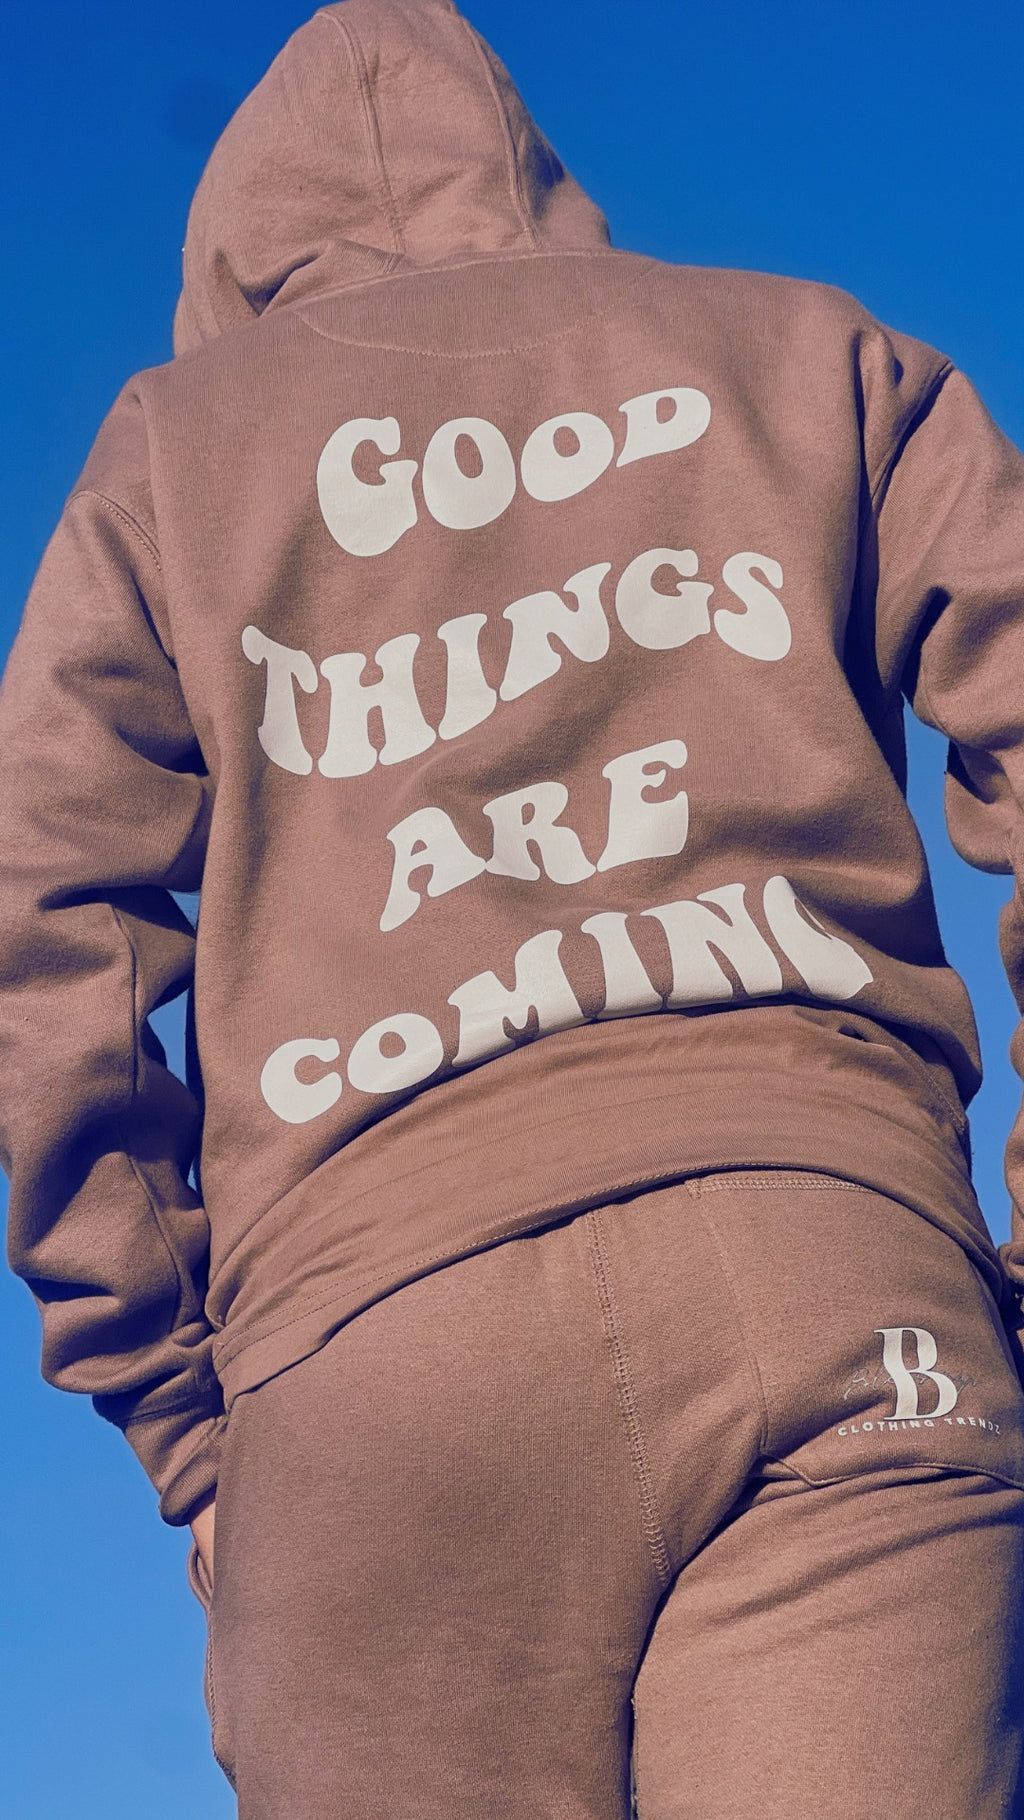 Good Things are Coming set